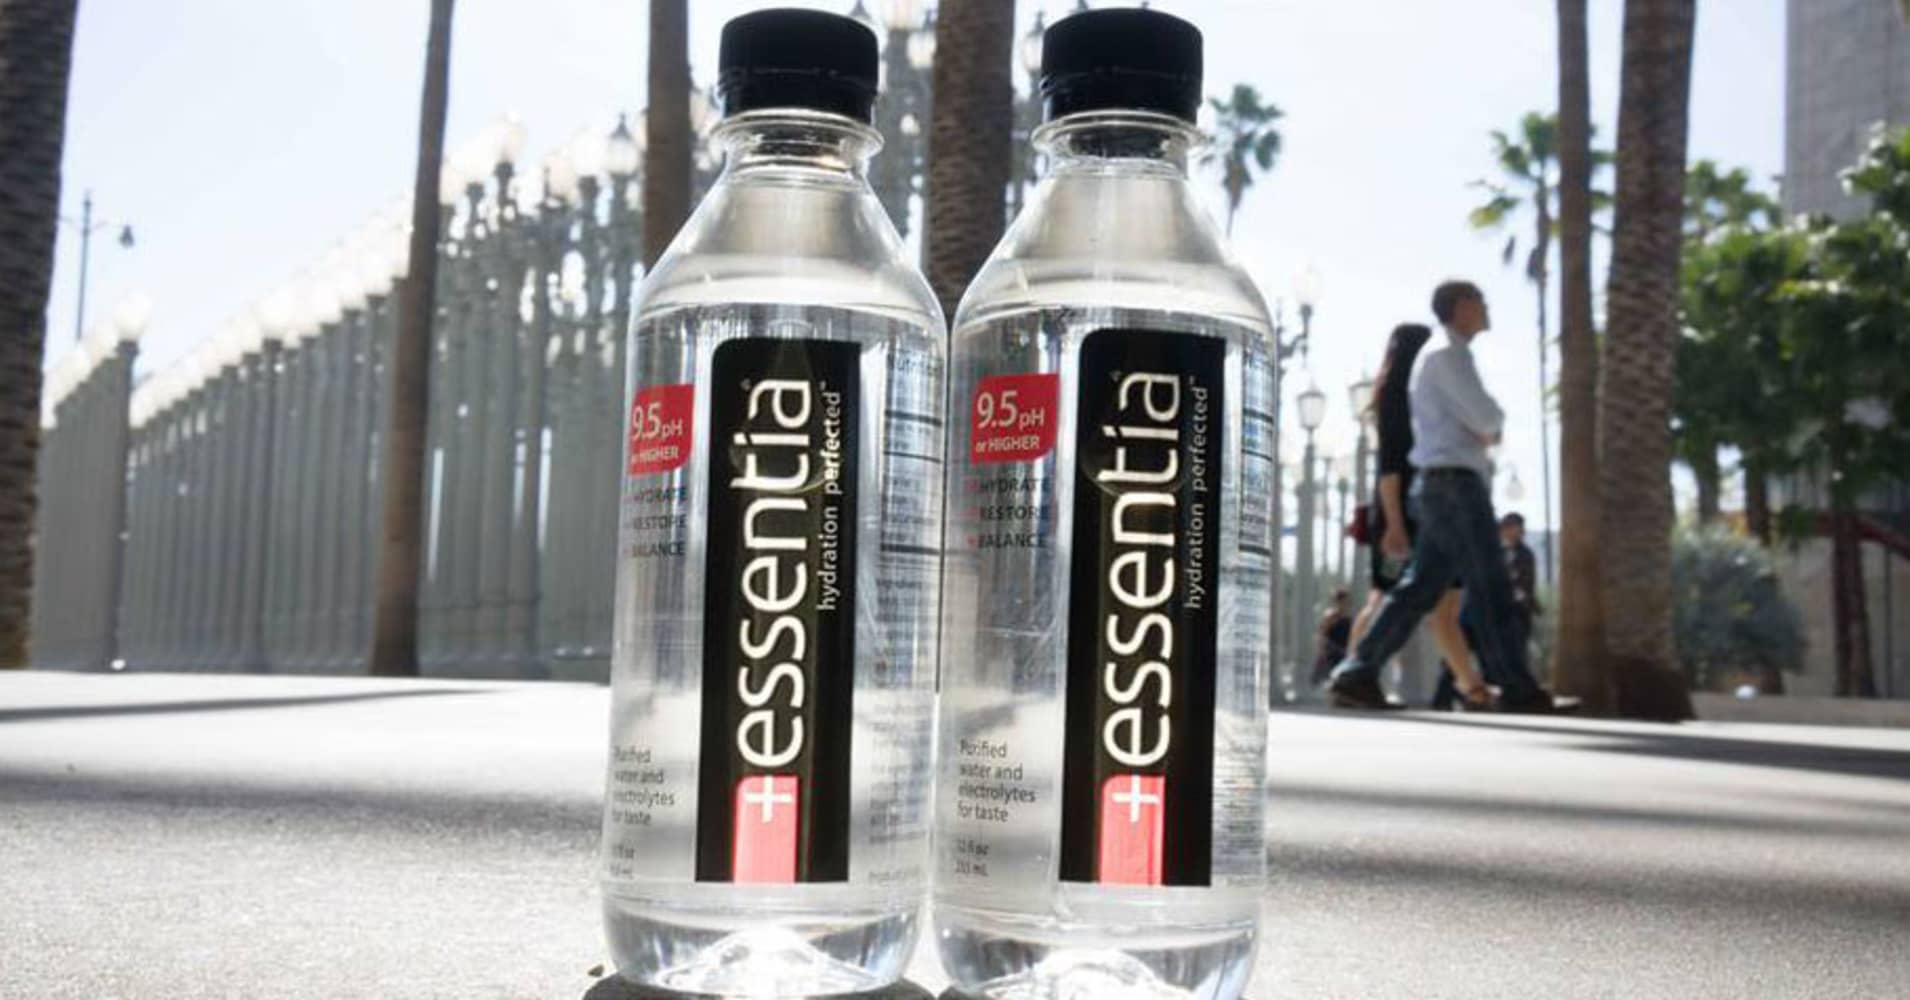 Smart water company Essentia is up for sale